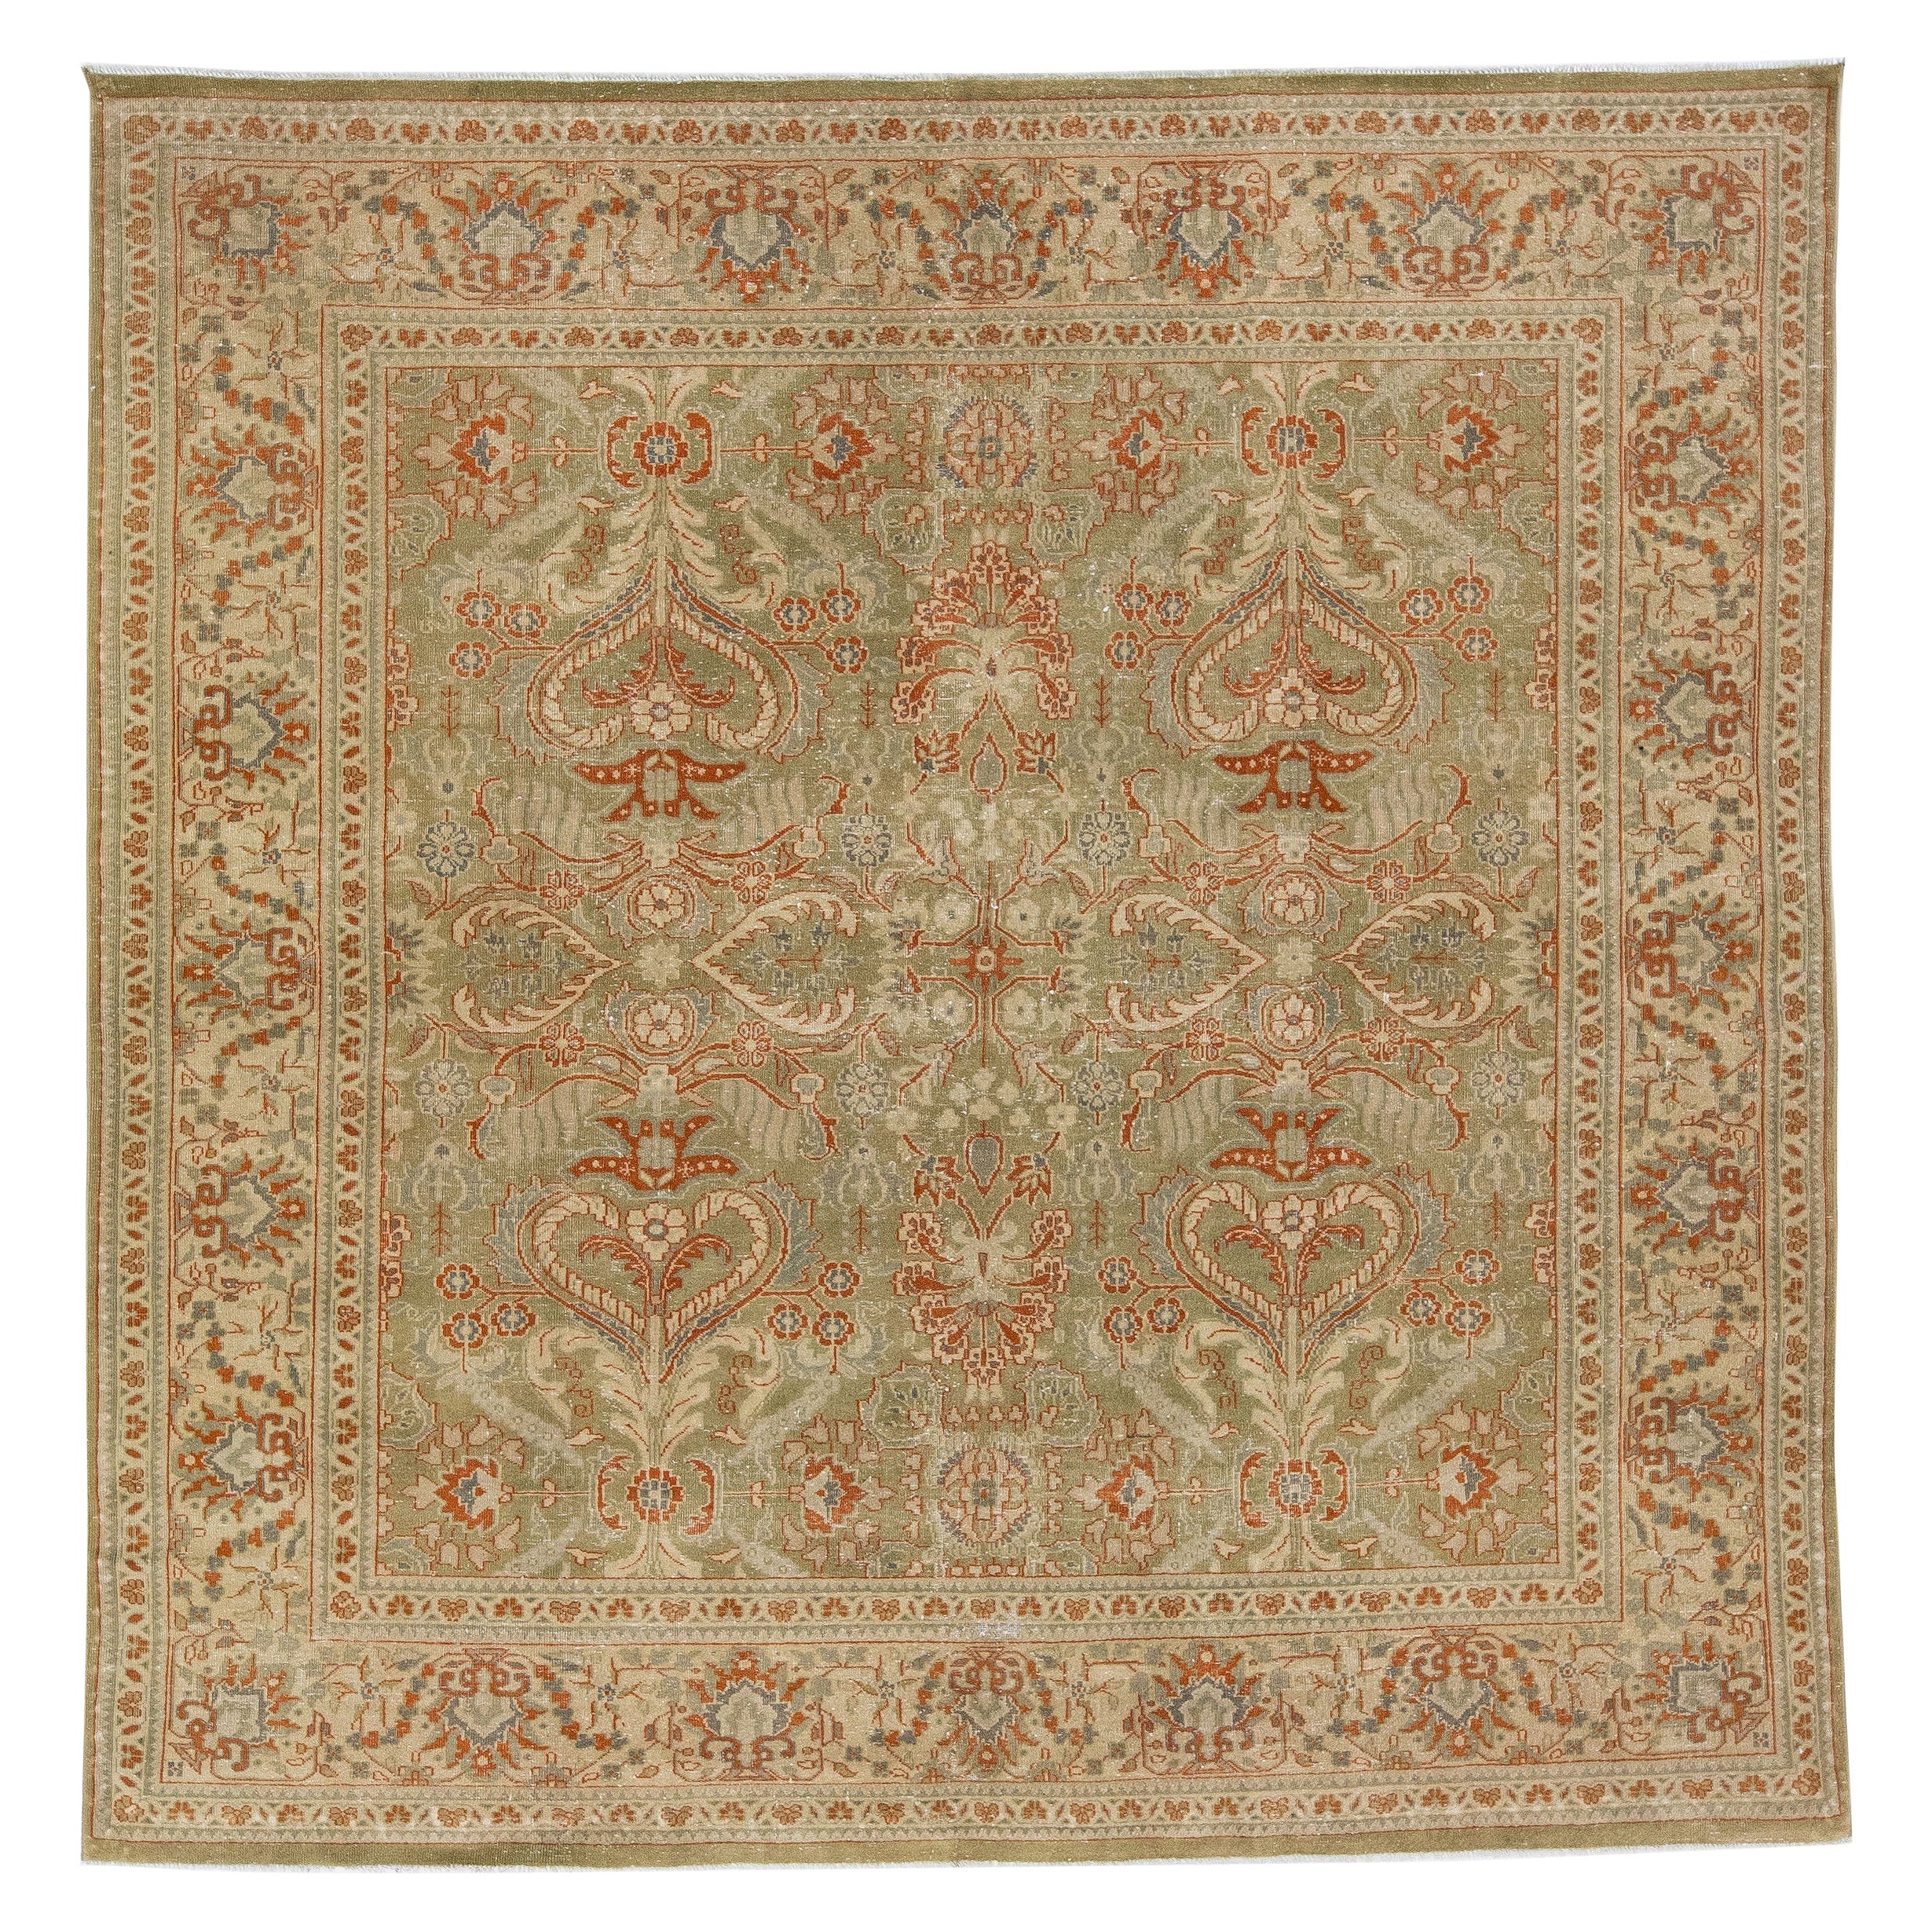 Green Antique Persian Mahal Handmade Square Wool Rug with Allover Floral Design For Sale